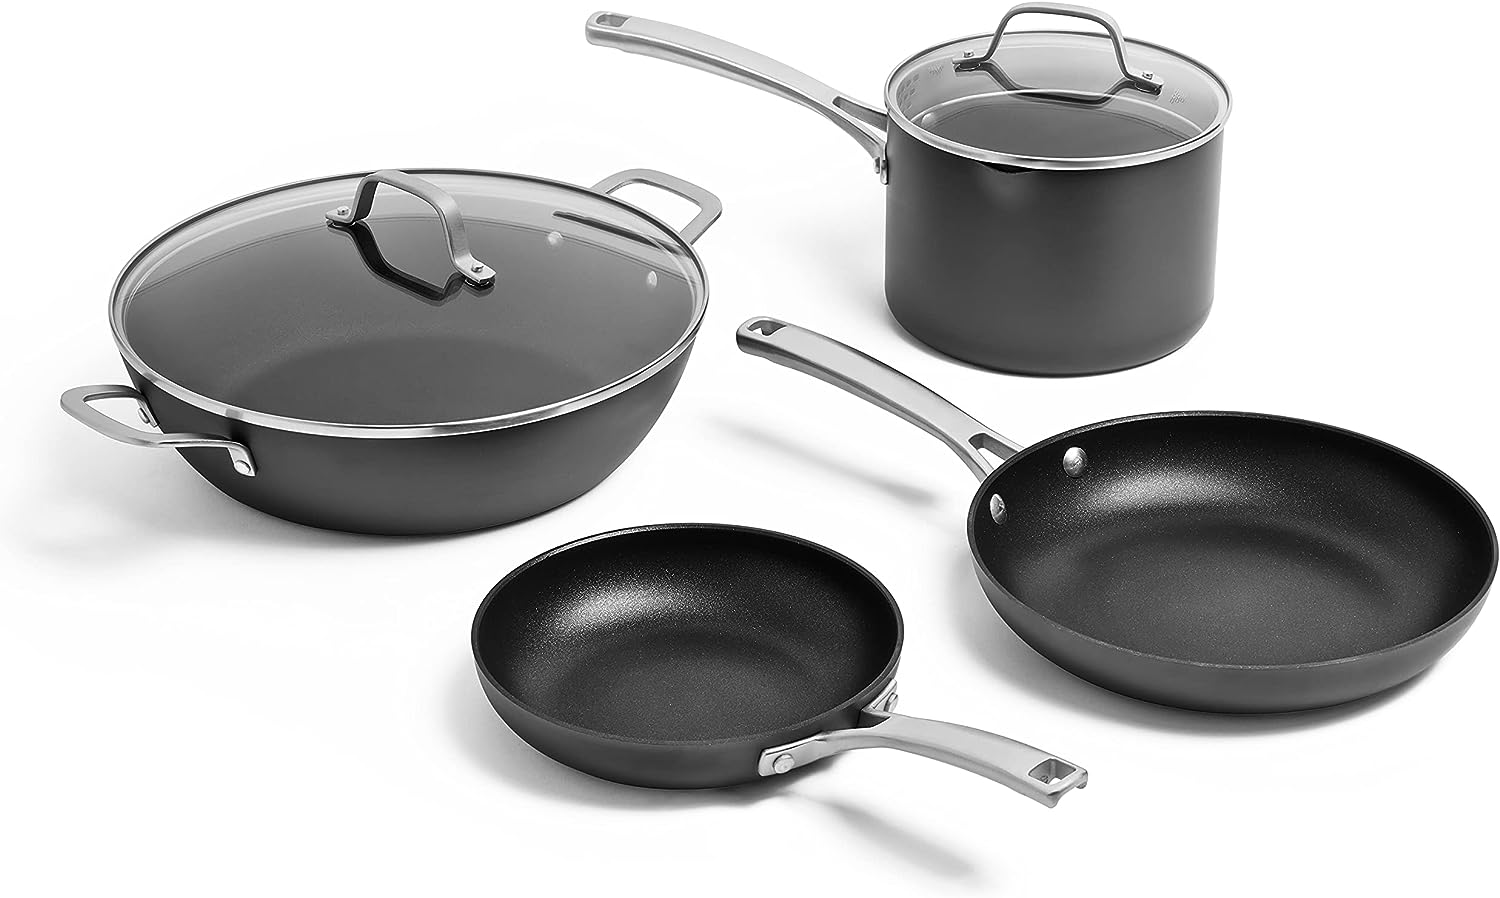 Calphalon Classic 12 Nonstick All Purpose Pan with Cover